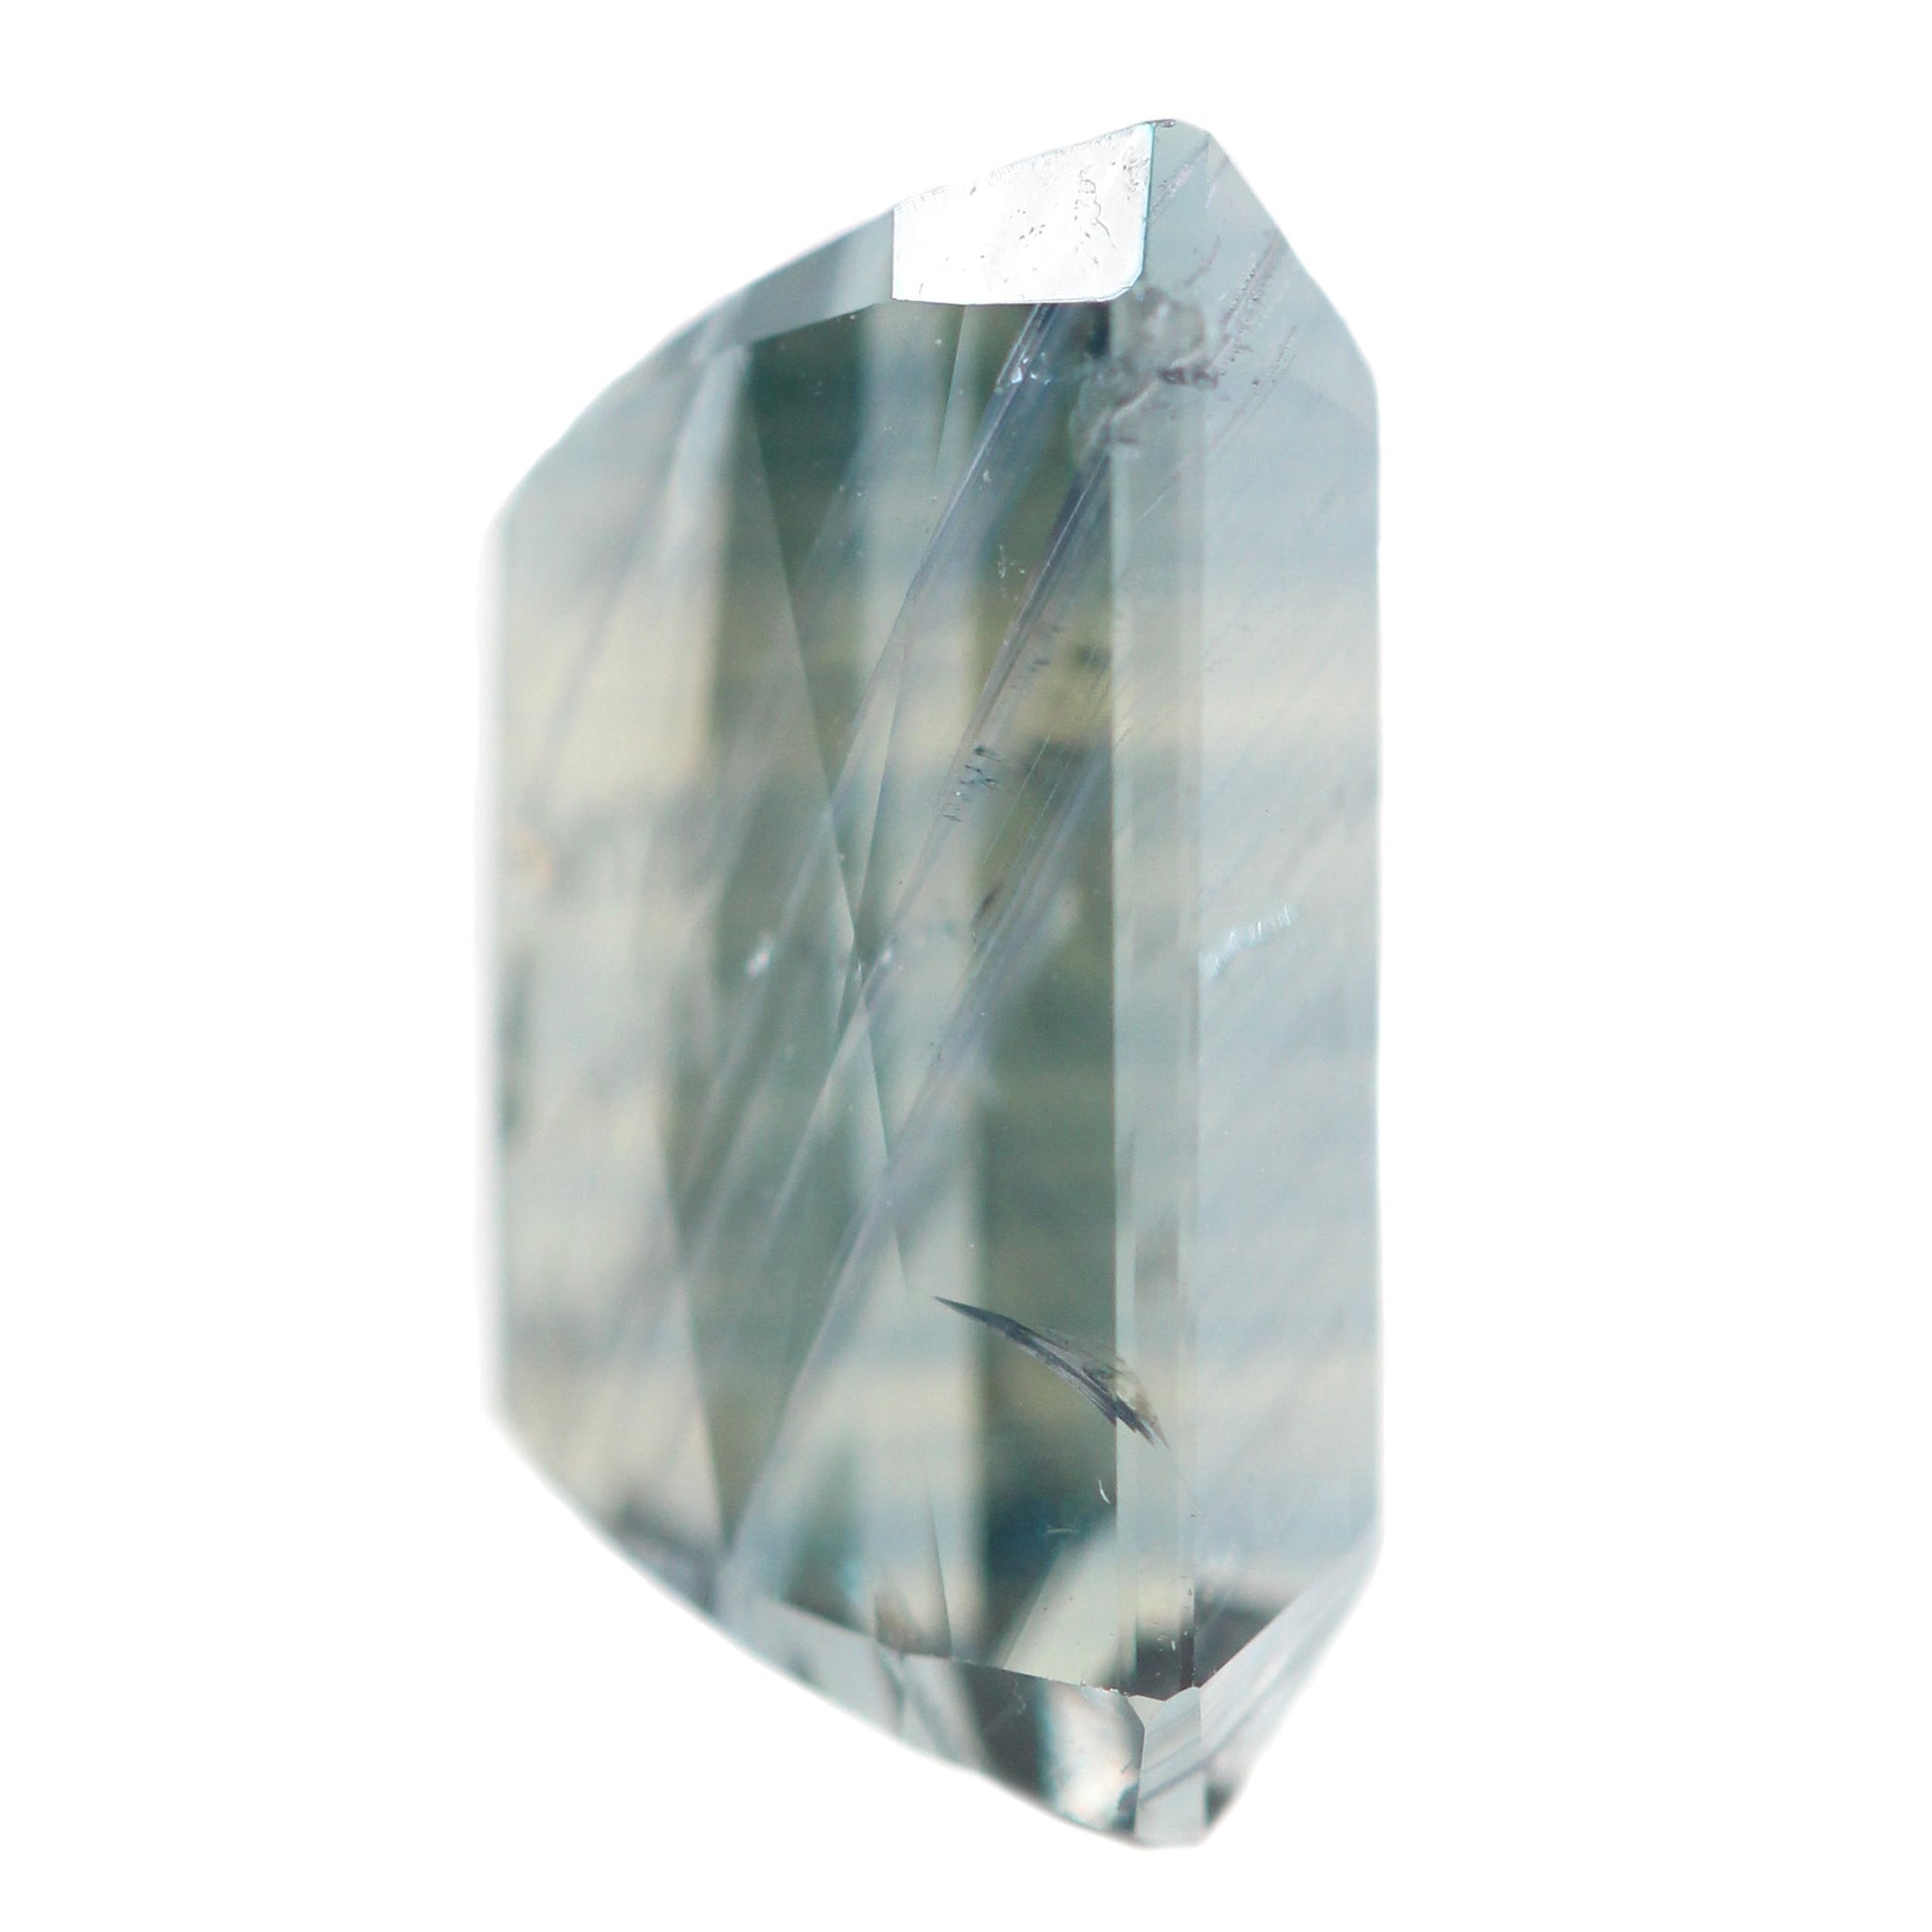 9.50 Carat Light Teal Emerald Cut Sapphire for Custom Work - Inventory Code ECTS950 - Midwinter Co. Alternative Bridal Rings and Modern Fine Jewelry